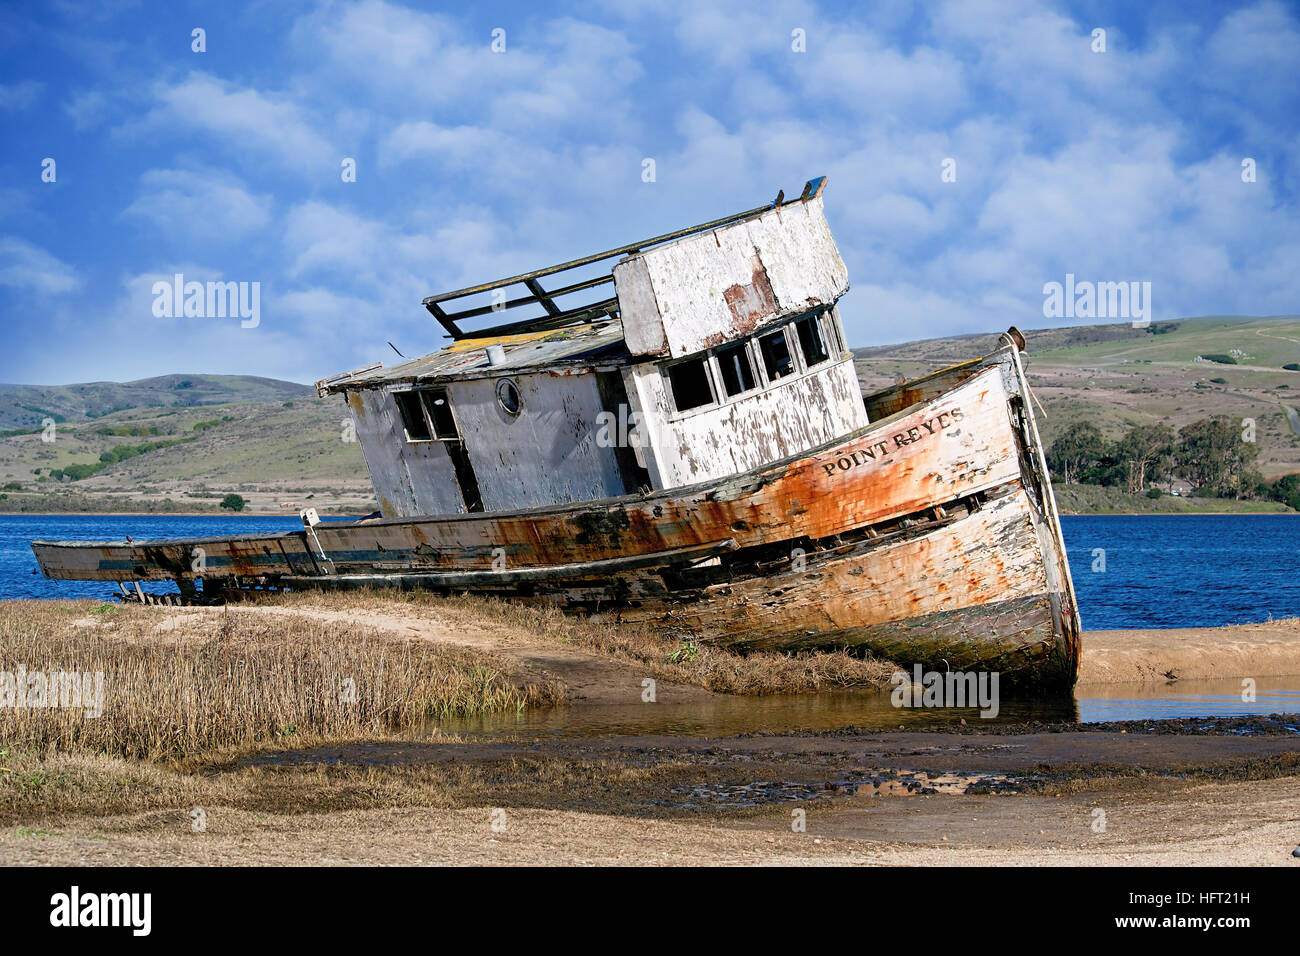 Lateral, panoramic view of an abandoned ship at Inverness, Point Reyes National Seashore, Marin County, California, USA, on a cloudy, sunny day.   I h Stock Photo